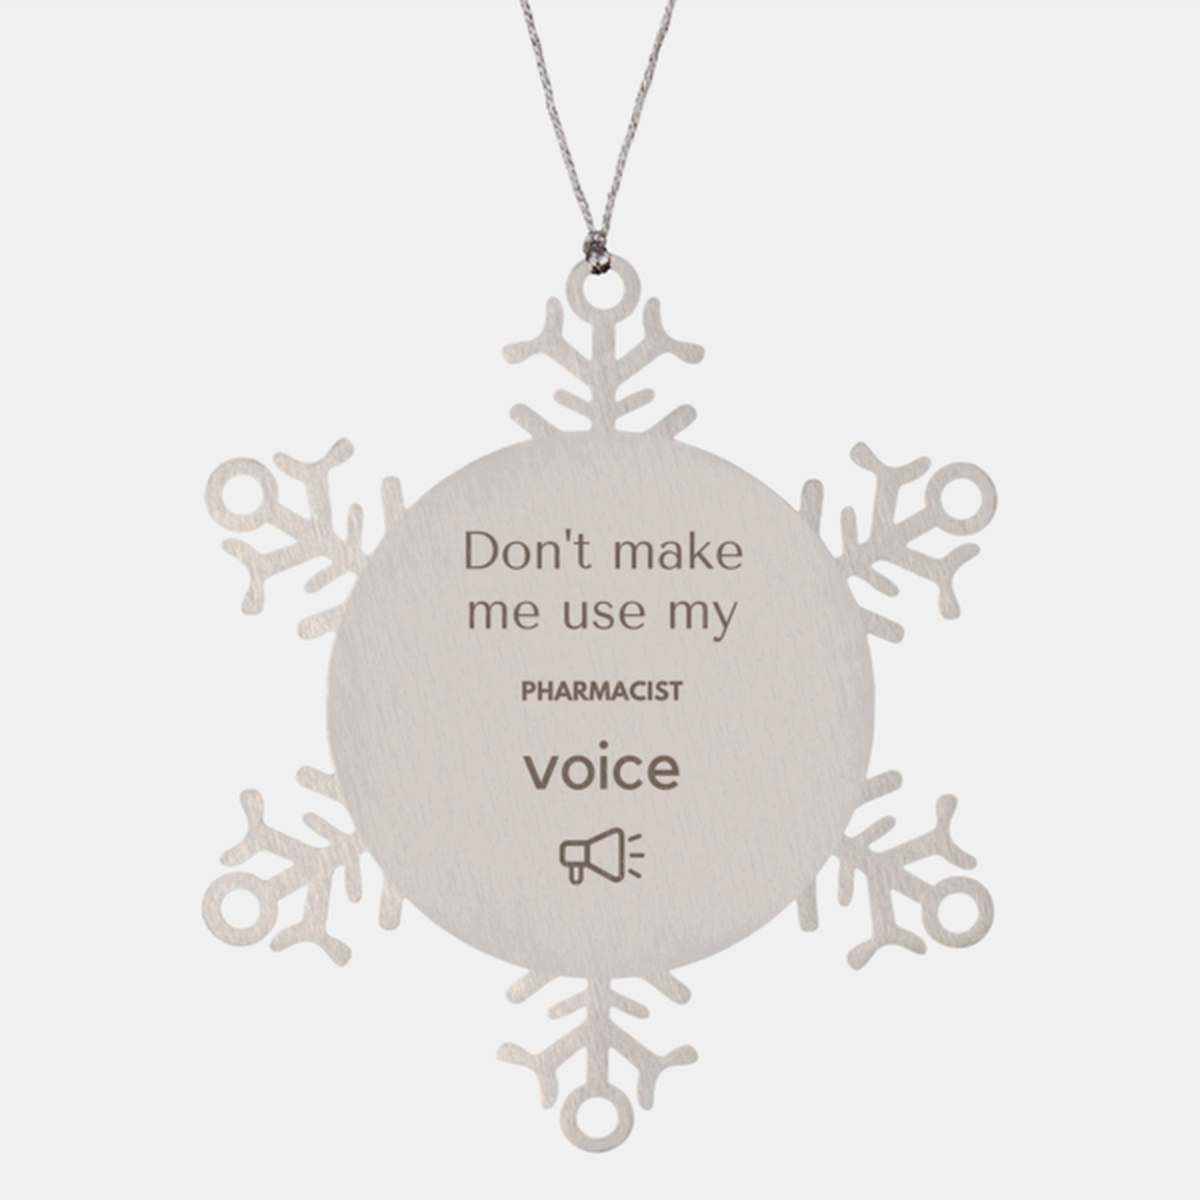 Don't make me use my Pharmacist voice, Sarcasm Pharmacist Ornament Gifts, Christmas Pharmacist Snowflake Ornament Unique Gifts For Pharmacist Coworkers, Men, Women, Colleague, Friends